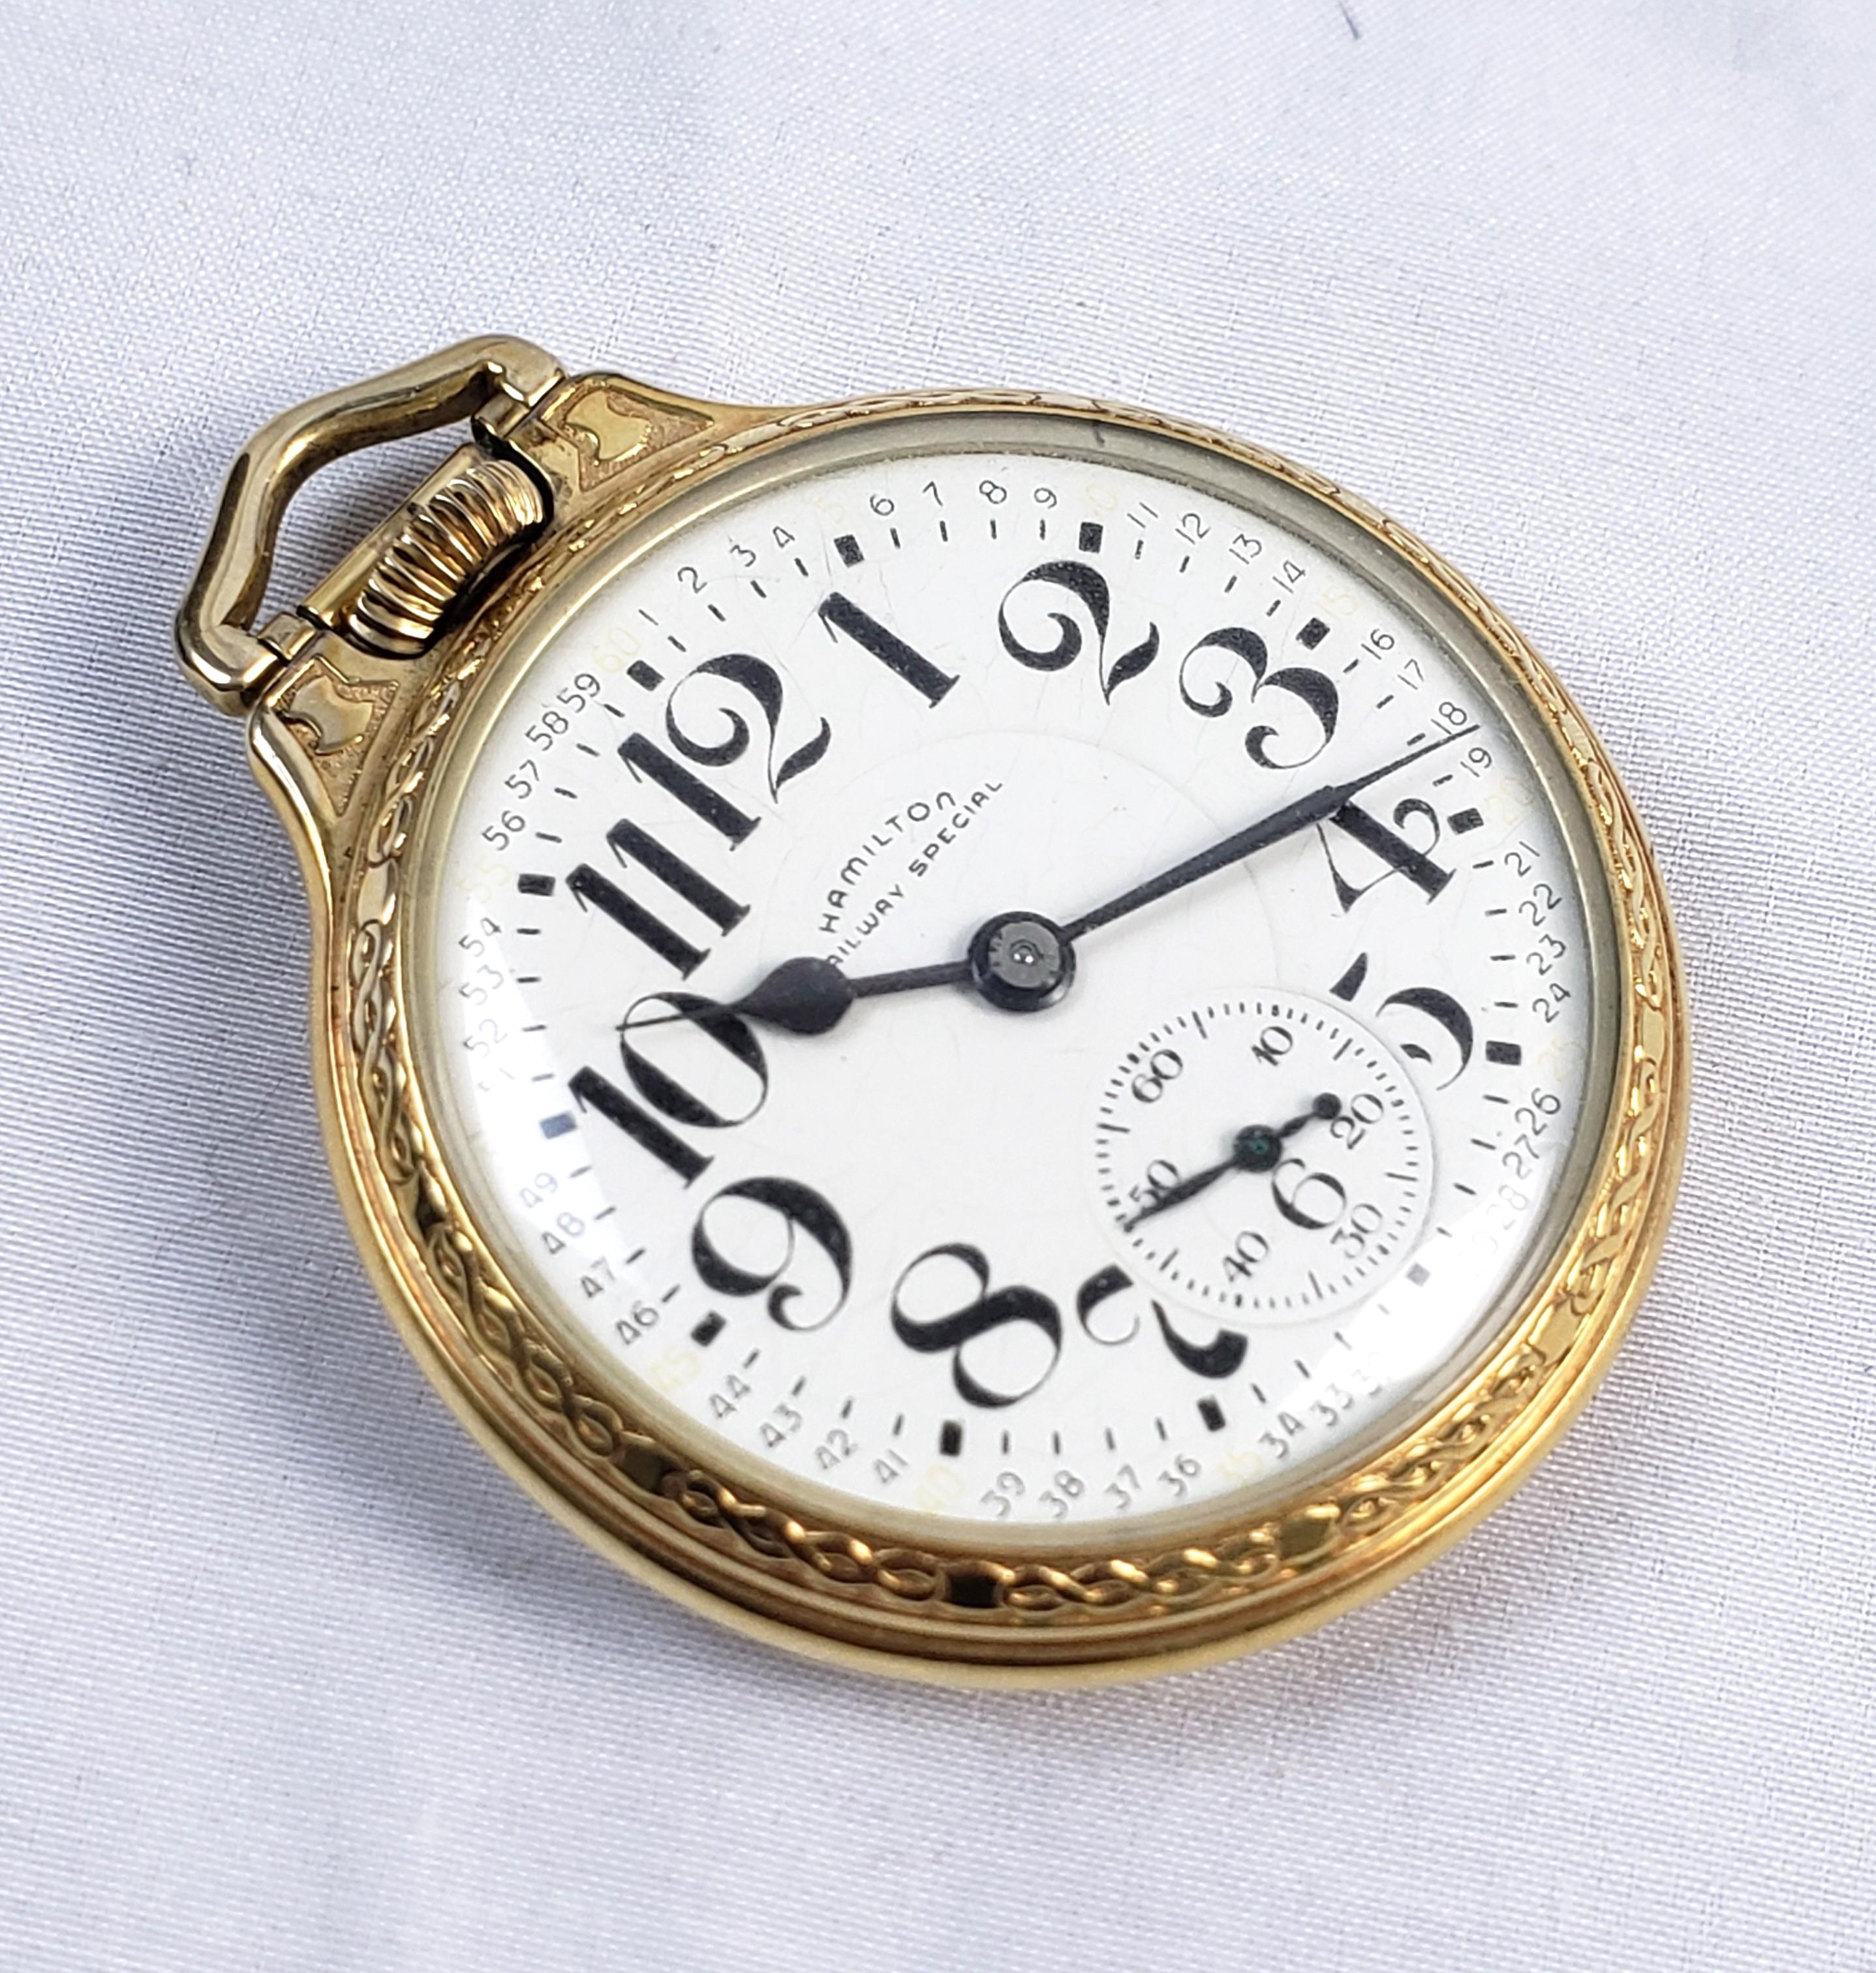 This antique pocket watch was made by the well known Hamilton watch company of the United States in approximately 1920. The watch is in good working order with a white porcelain face and large Arabic numerals. The case is gold filled and contains